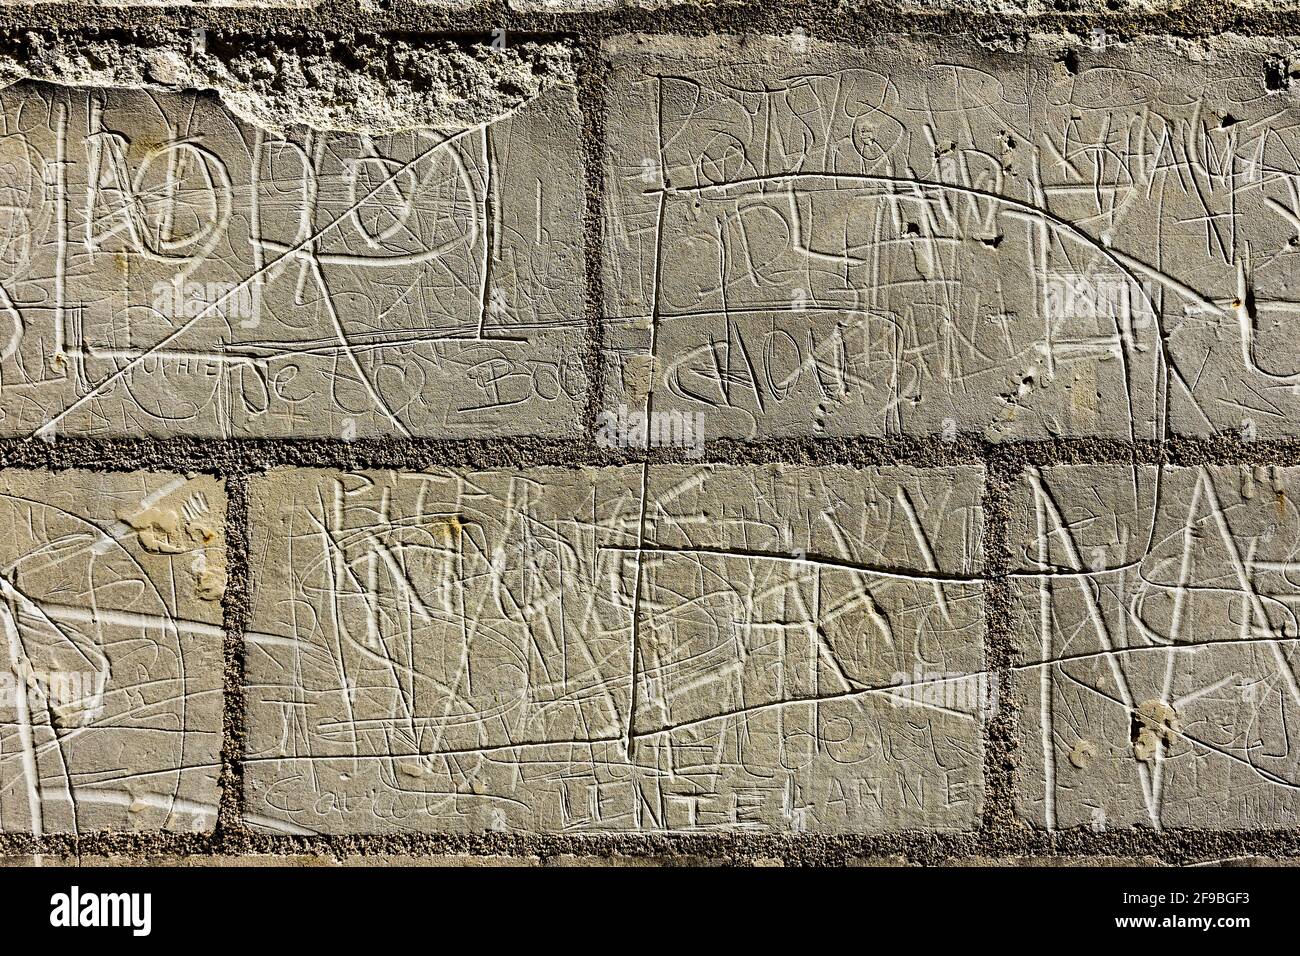 Names and initials scratched into stone wall - Loches, Indre-et-Loire, France. Stock Photo